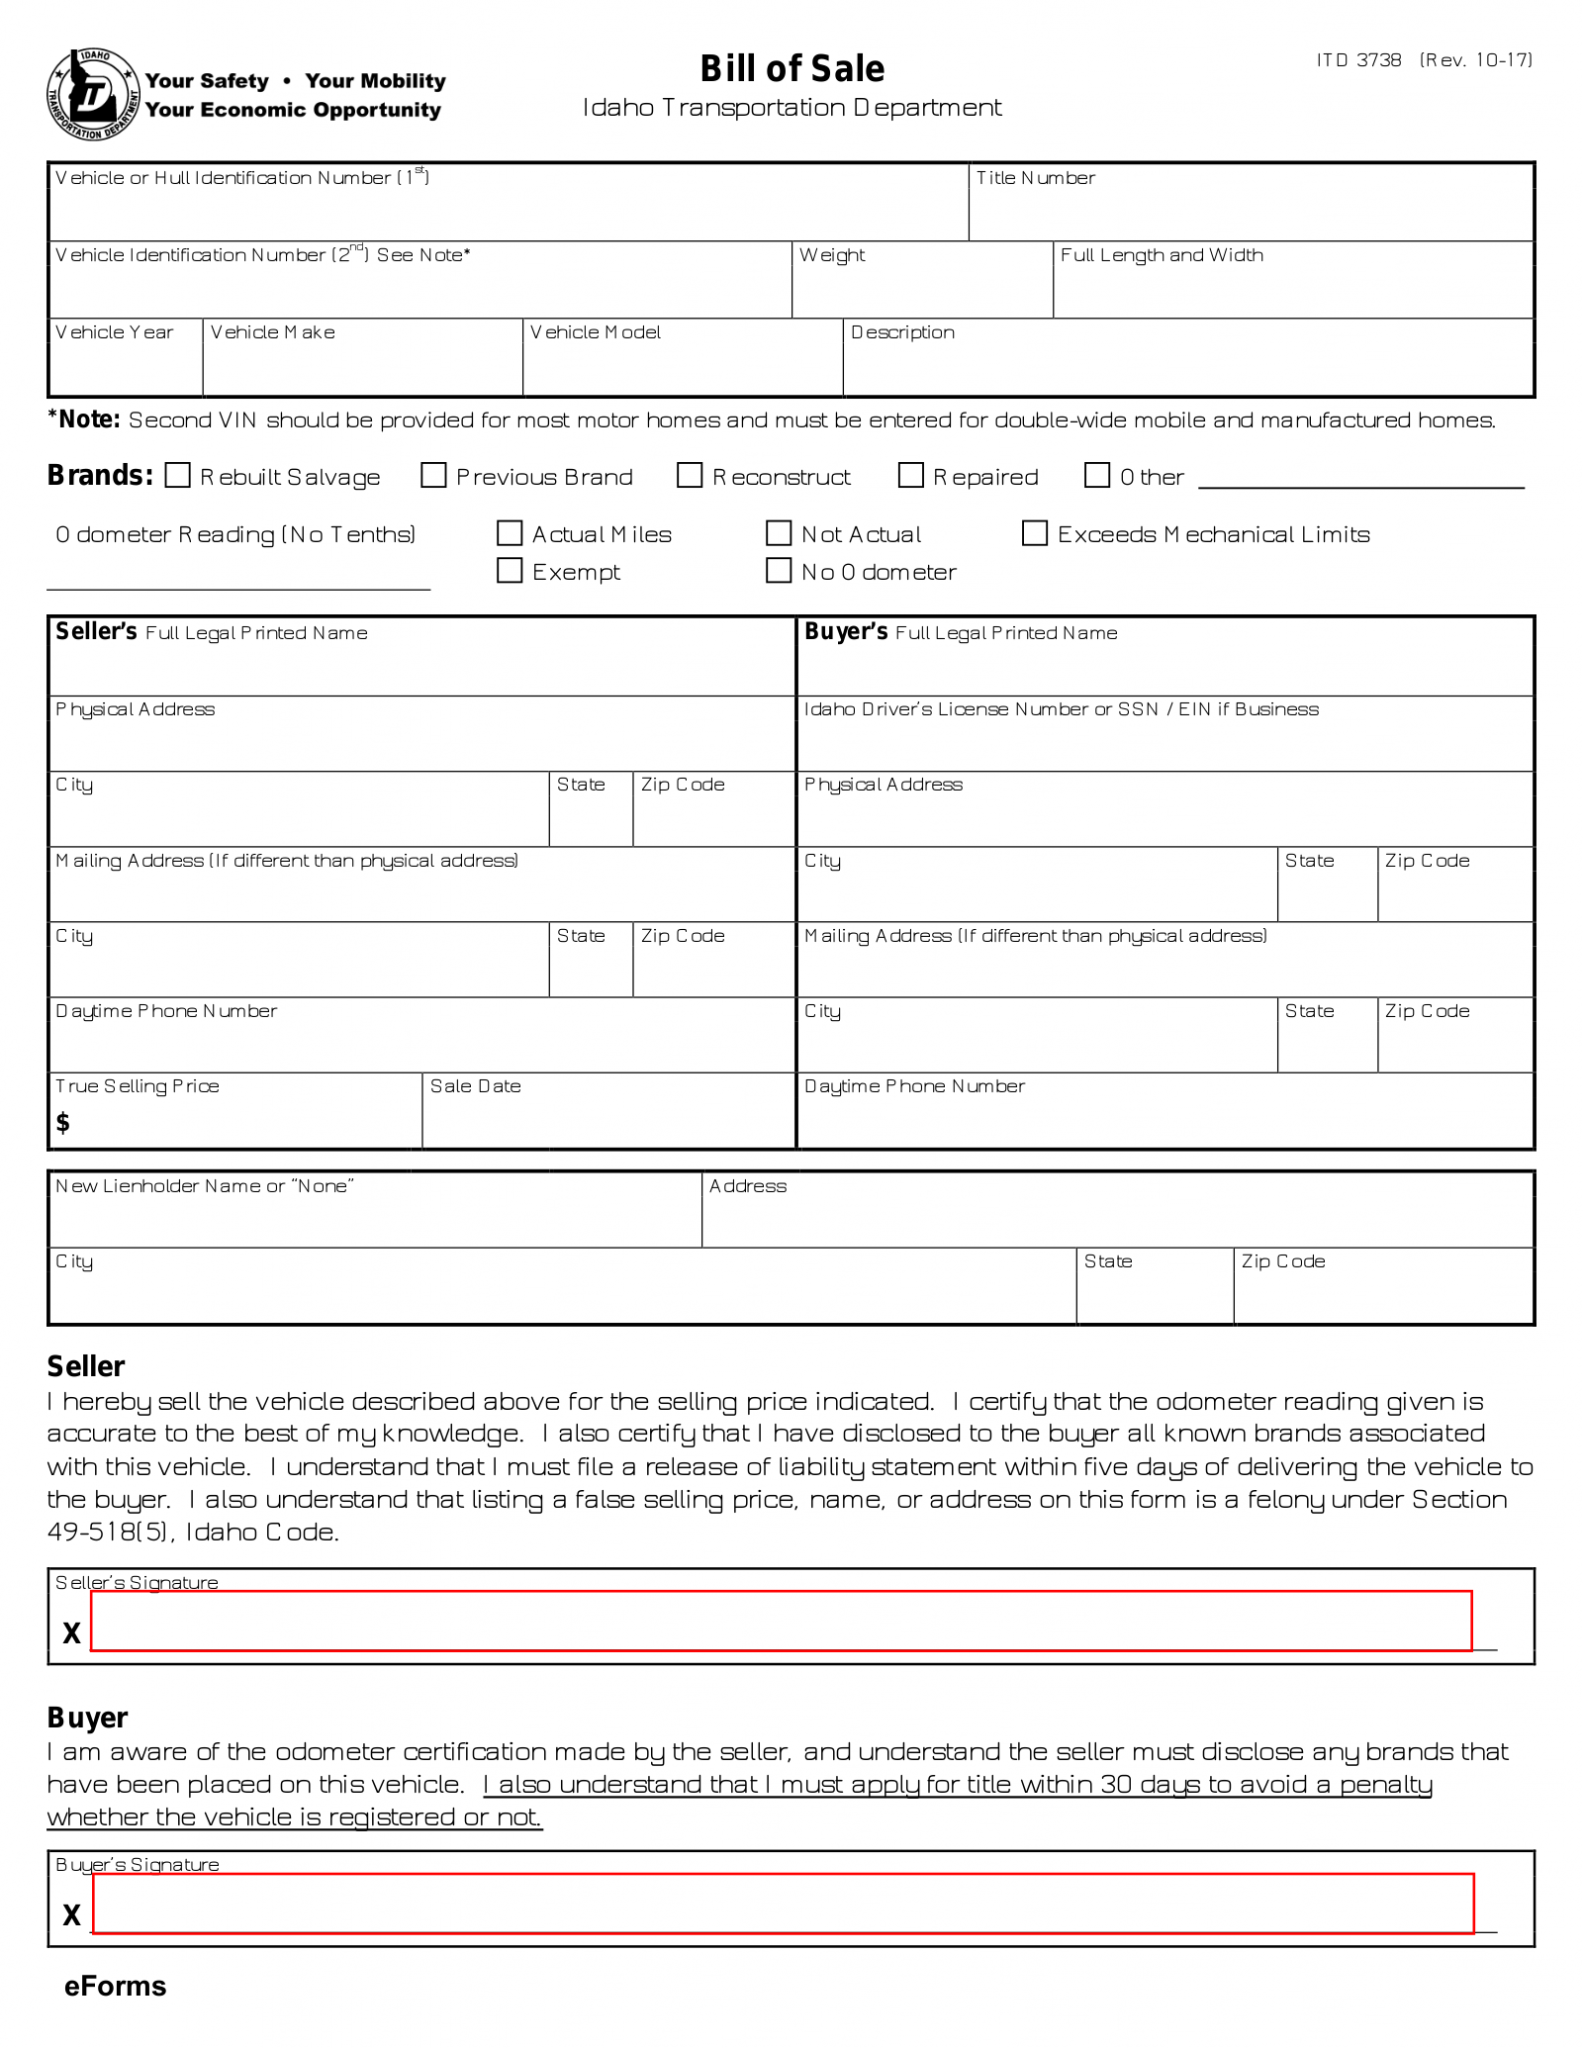 texas-motor-vehicle-bill-of-sale-form-download-the-free-car-bill-of